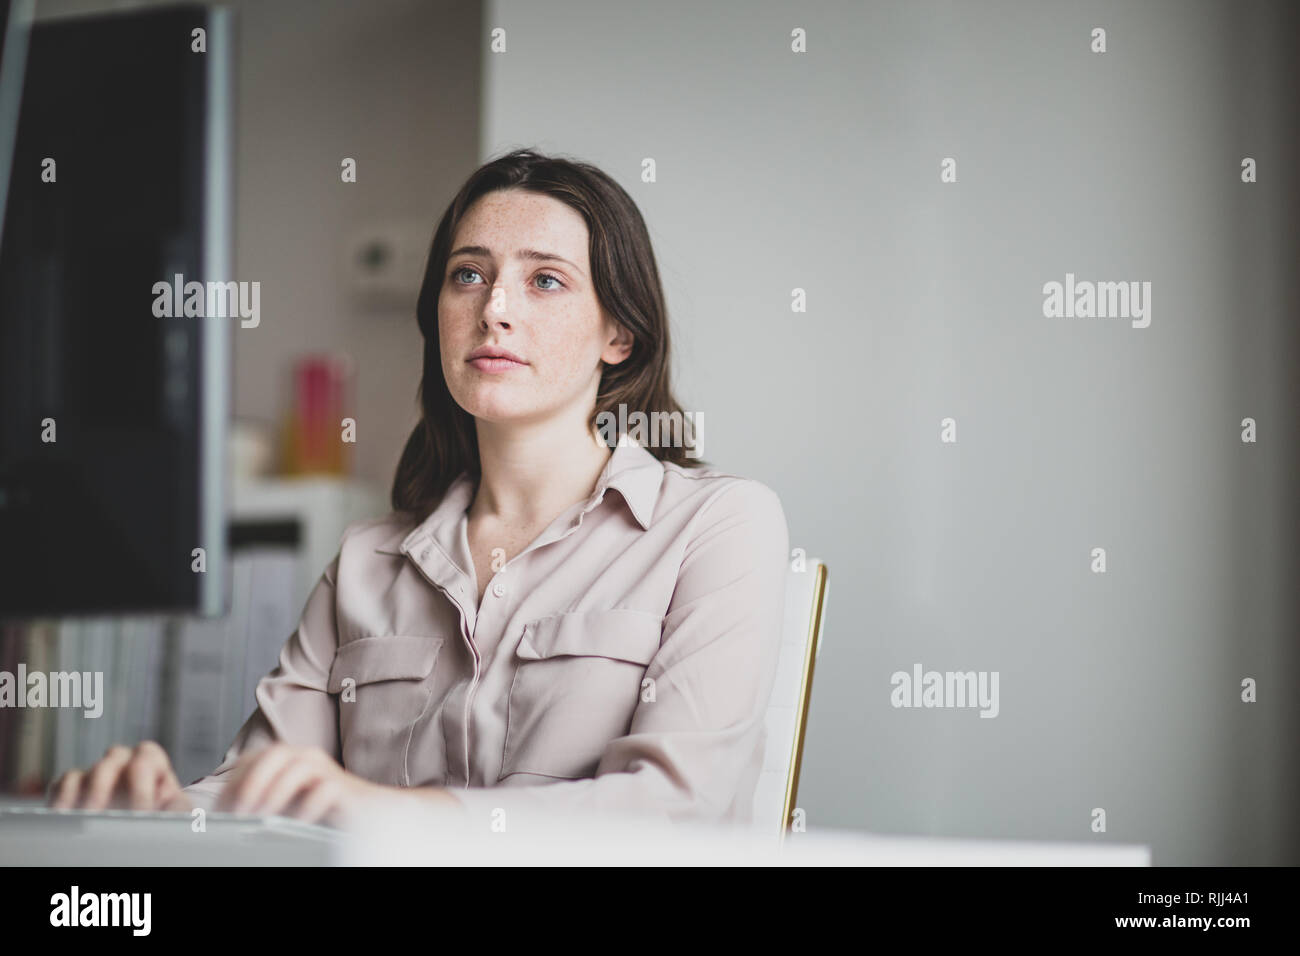 Female business executive working in an office on a desktop computer Stock Photo